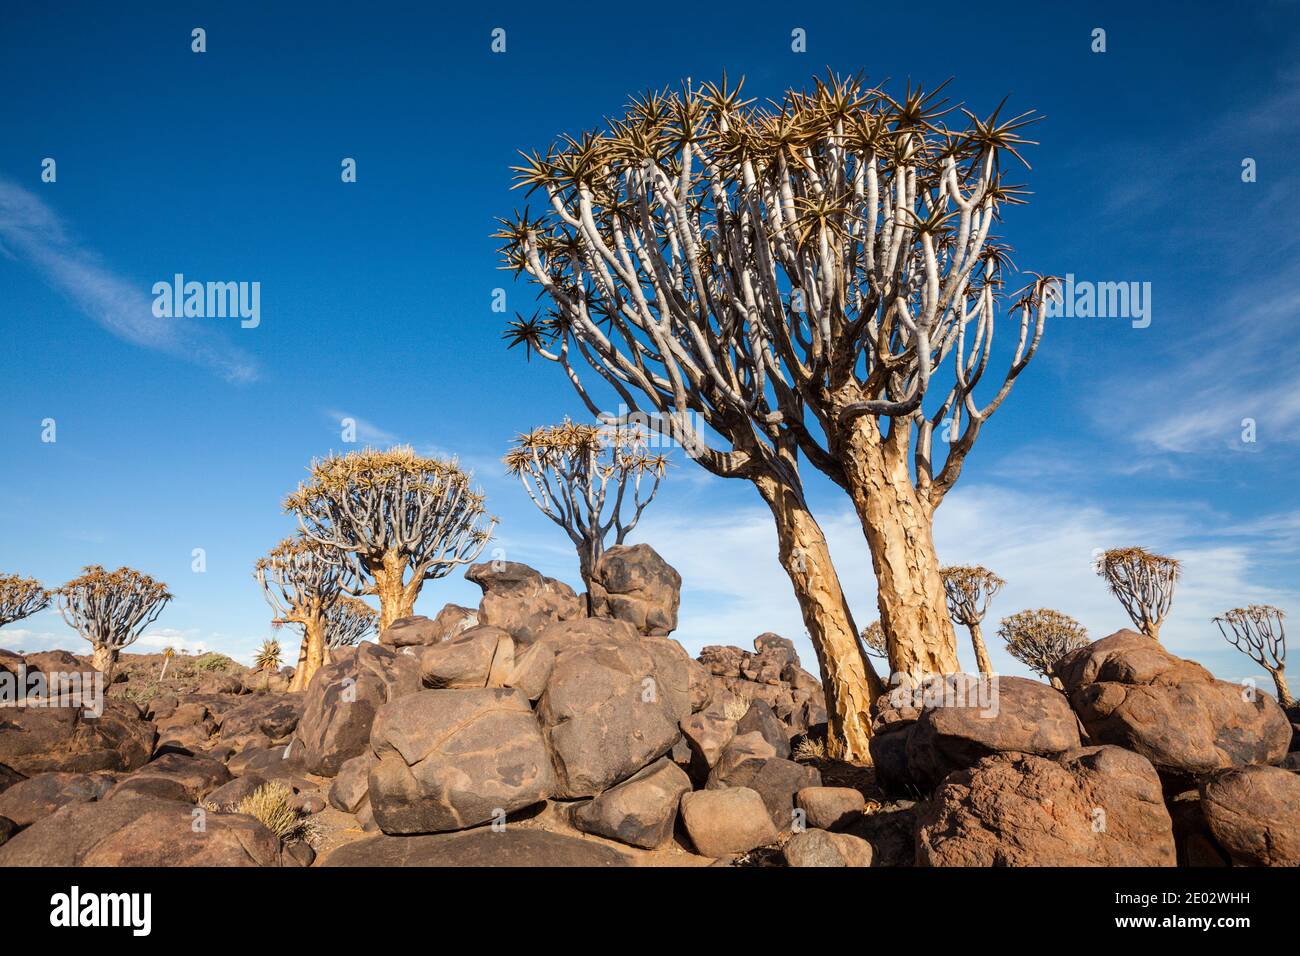 Impressions of Quivertree Forest, Aloidendron dichotomum, Keetmanshoop, Namibia Stock Photo